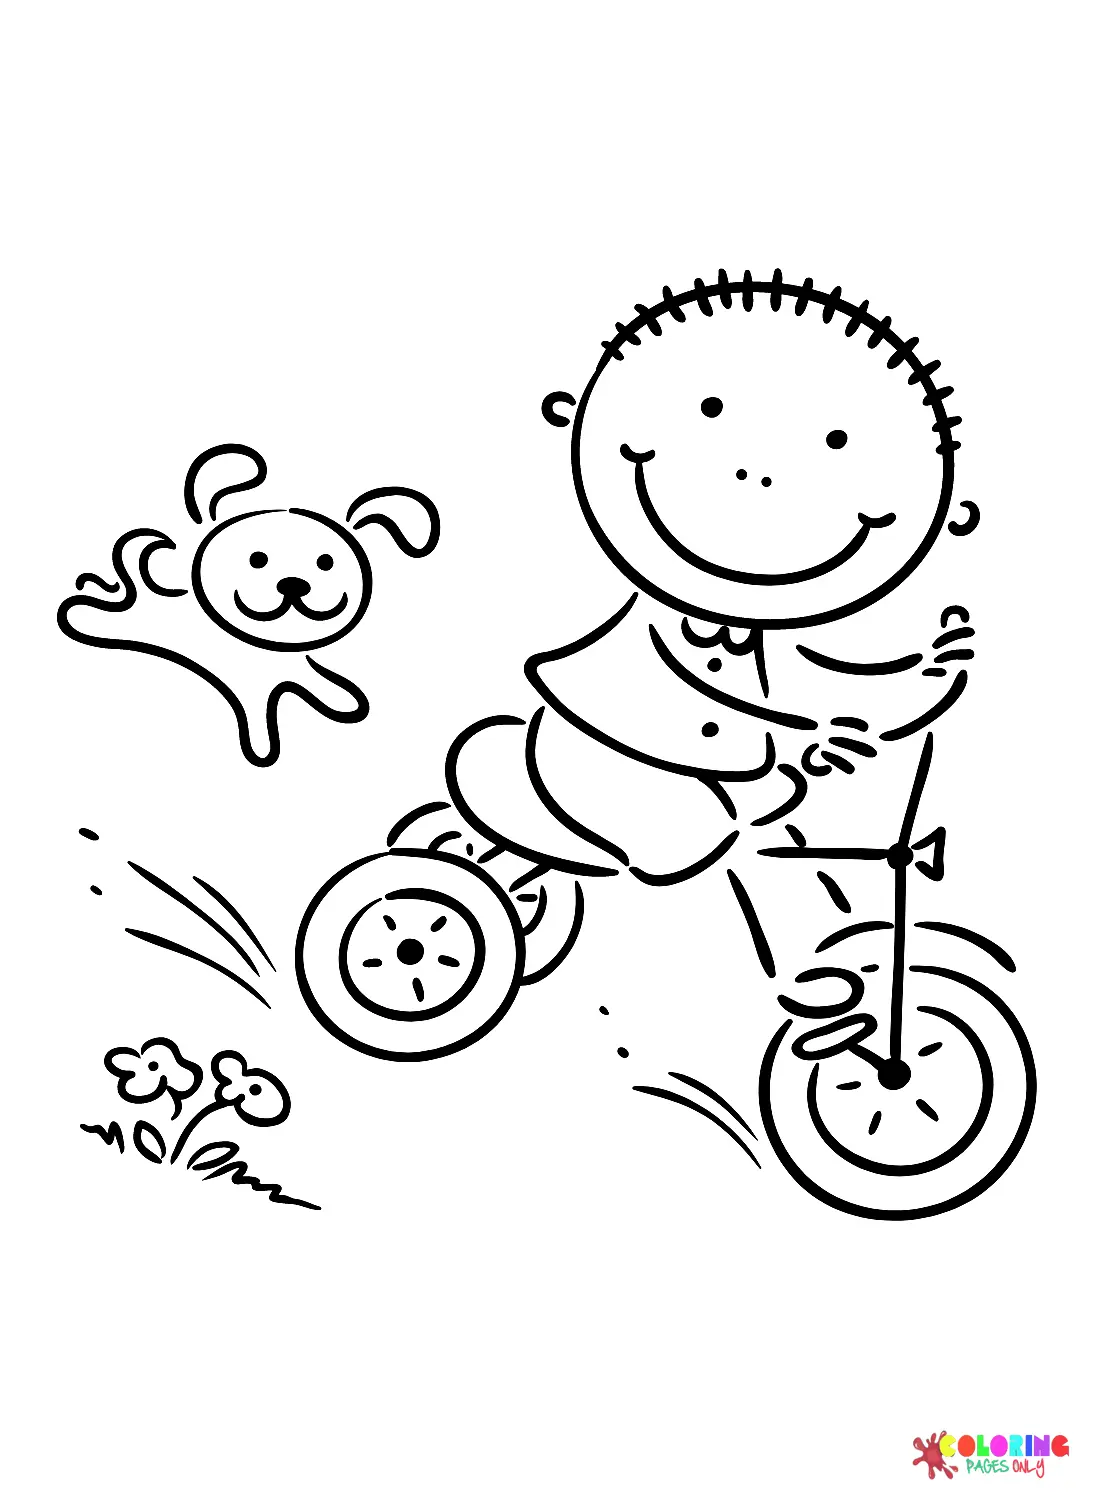 Tricycle Coloring Pages